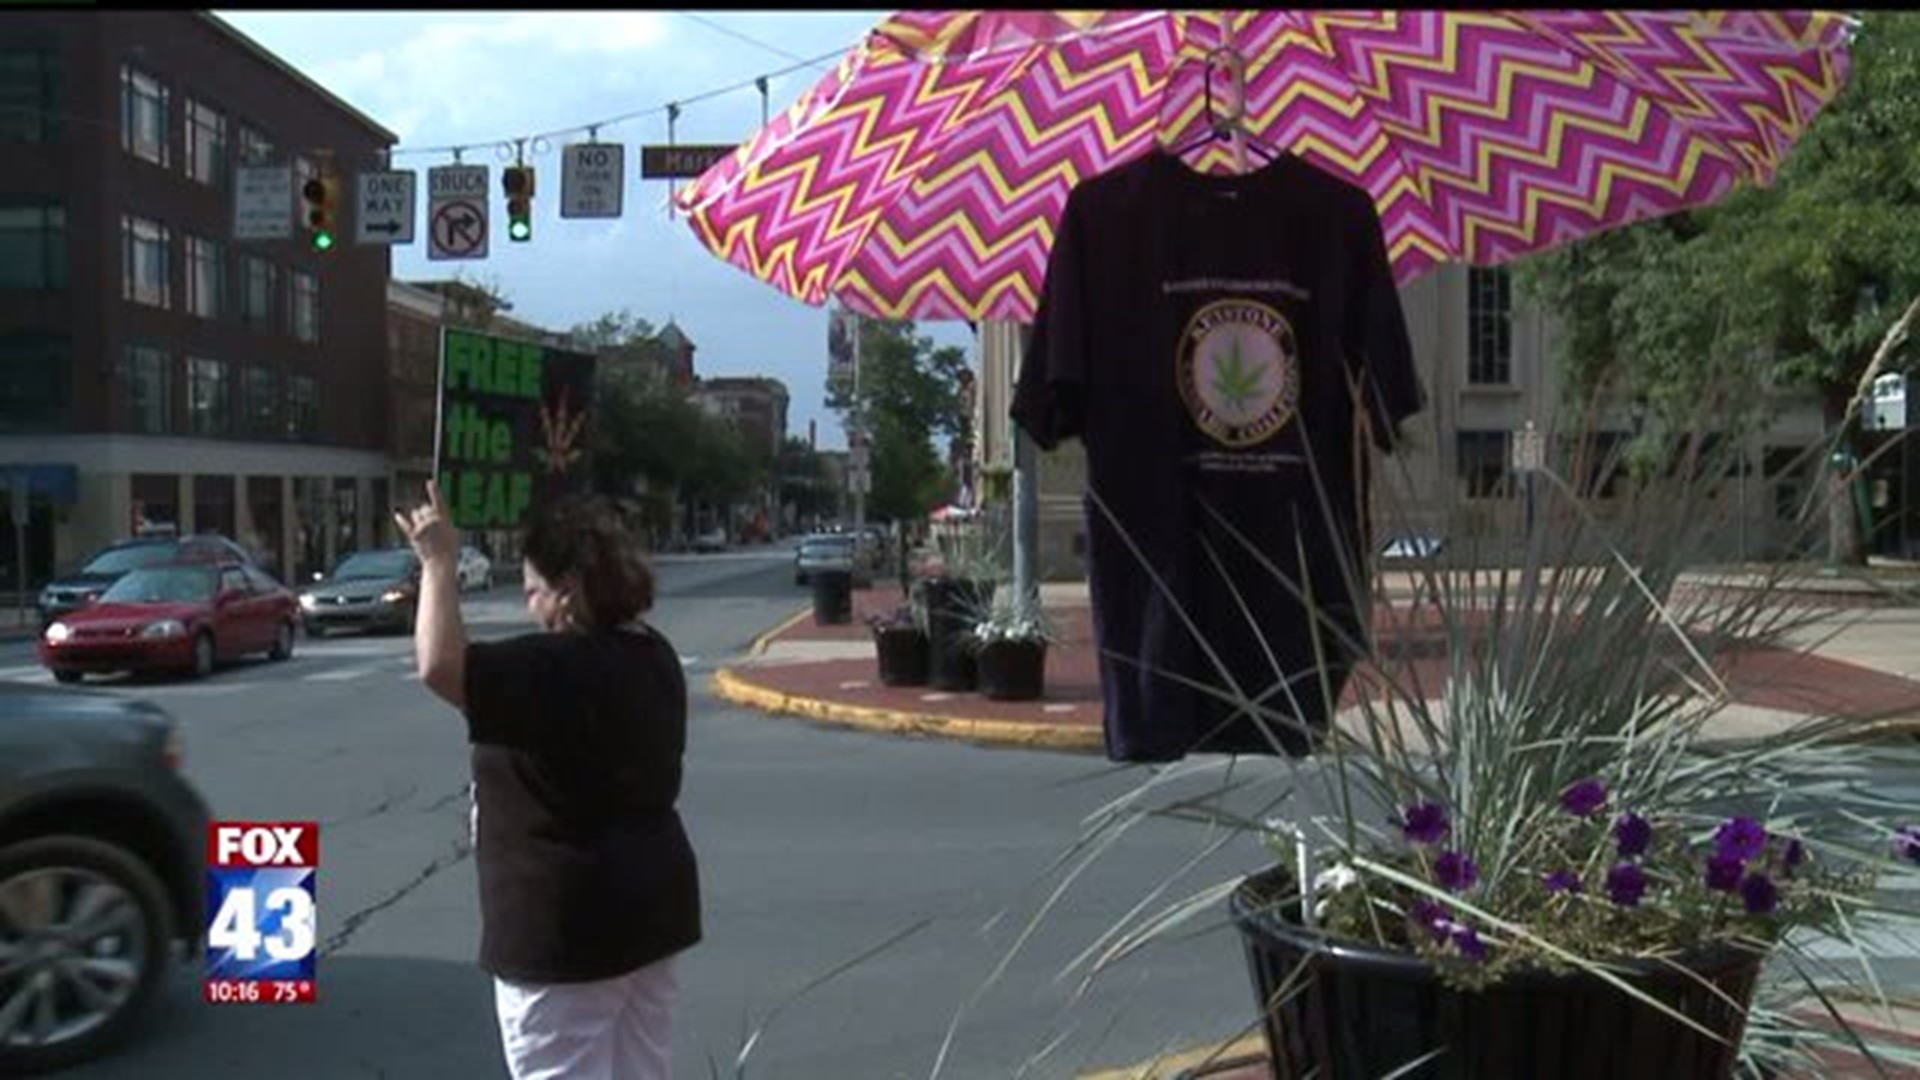 People in York Show Support for Legalization of Medical Marijuana